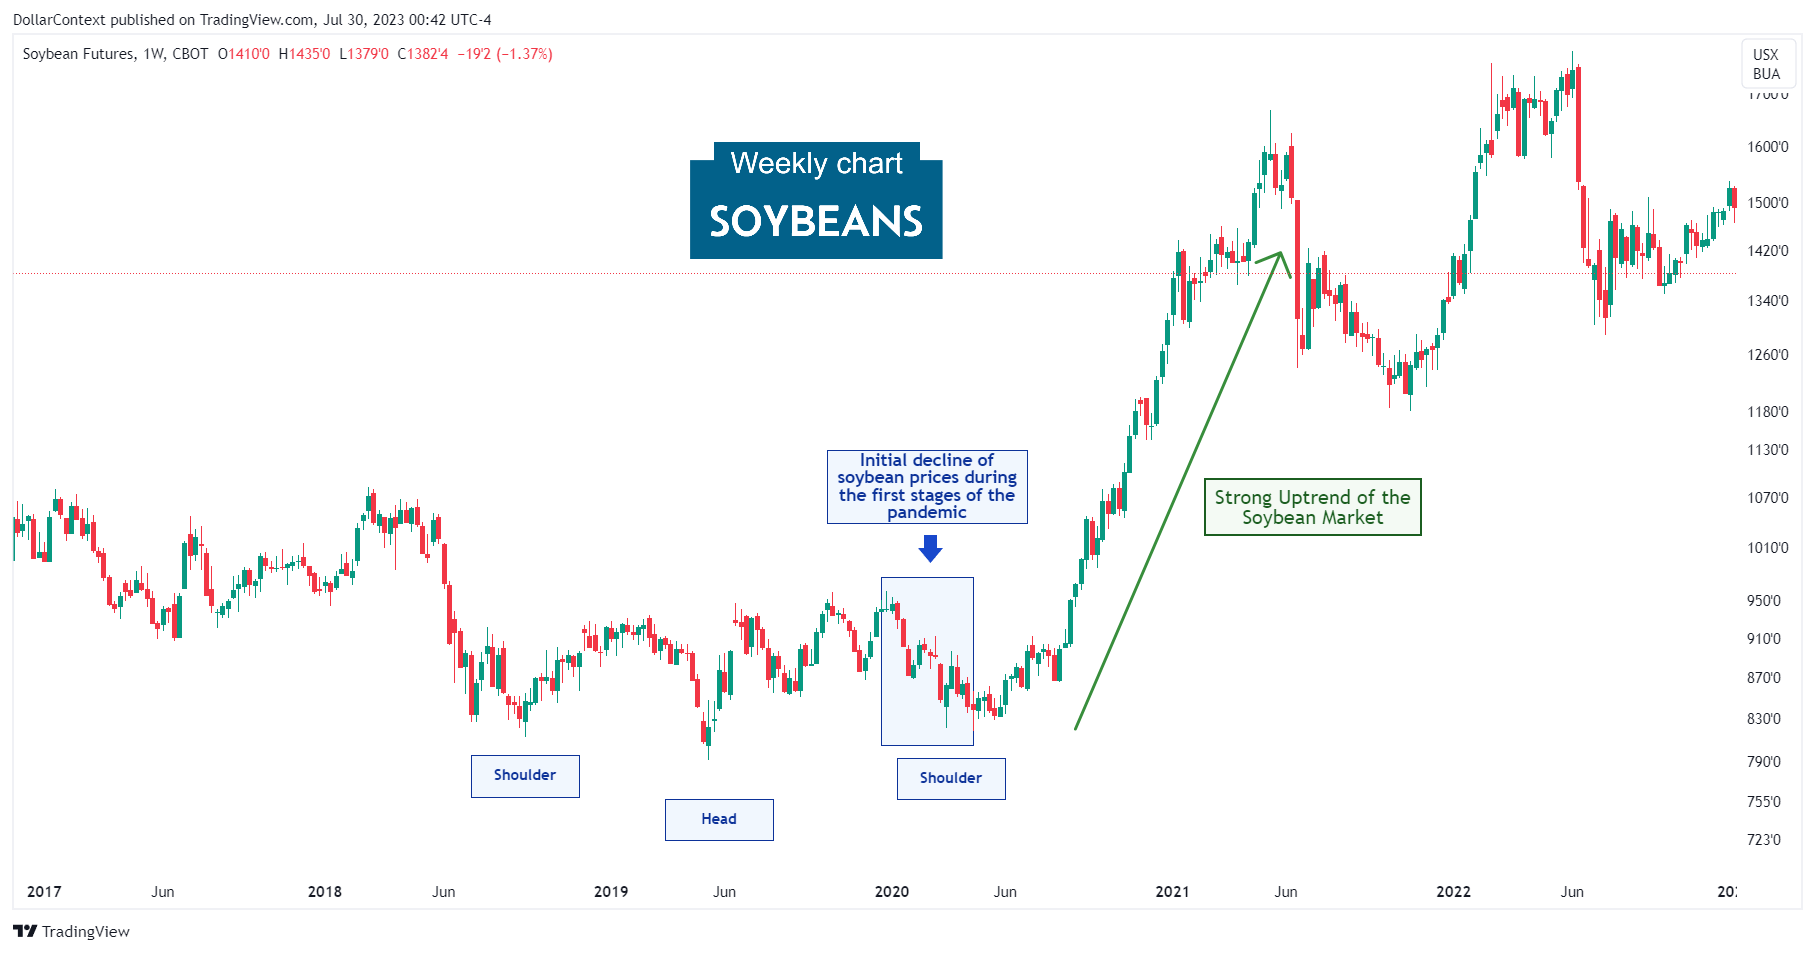 The Uptrend of the Soybean Market from May 2020 to May 2021